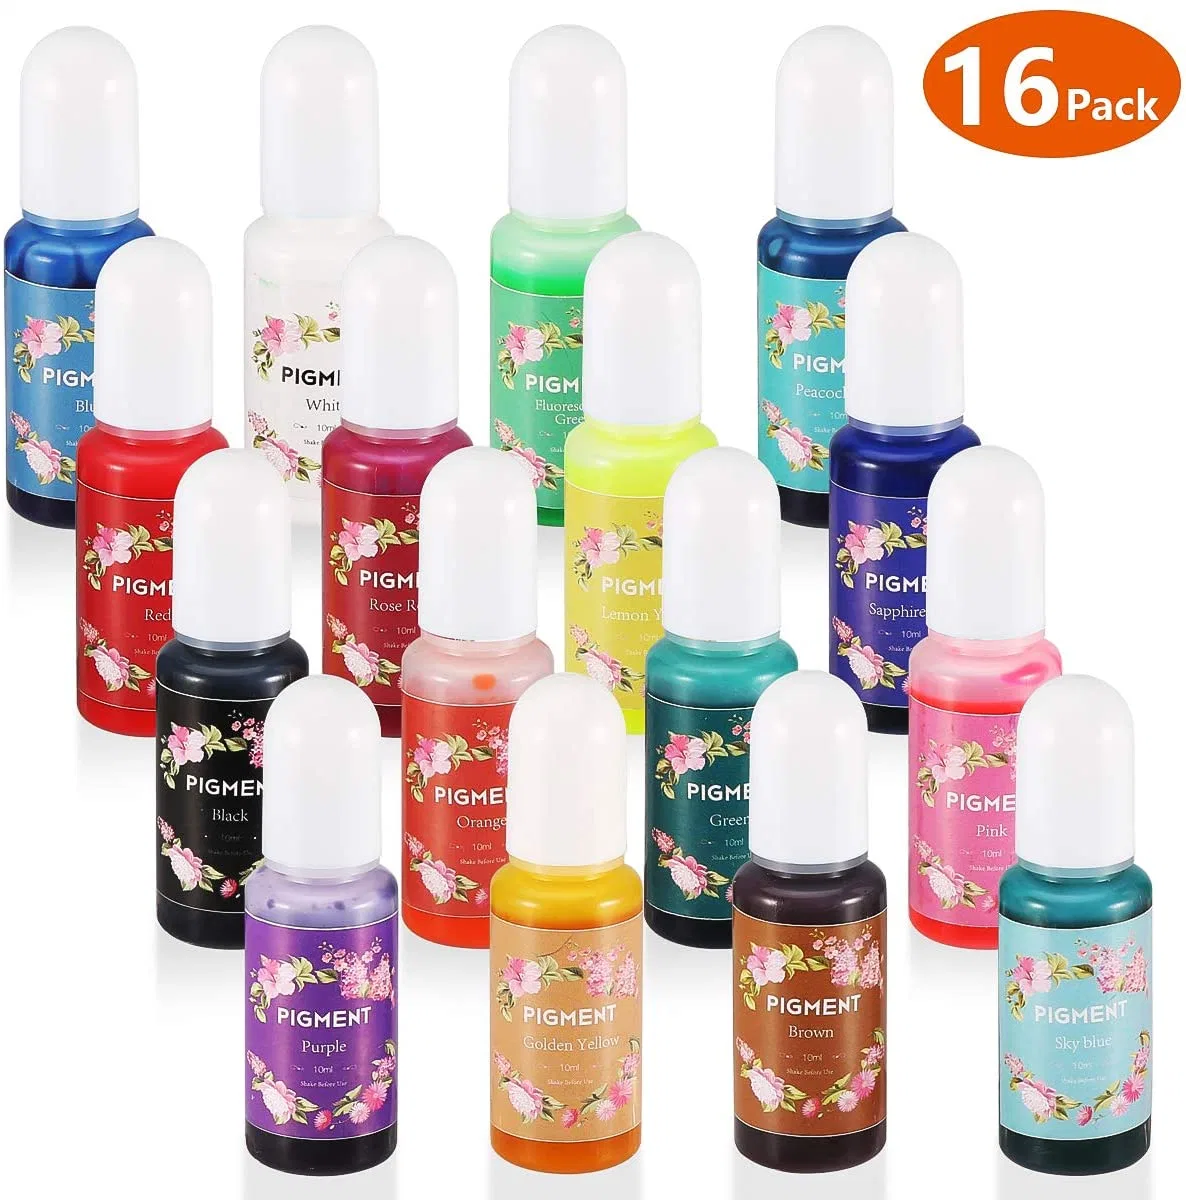 Crystal Clear Vivid Color Highly Concentrated Colorant UV Resin Dye